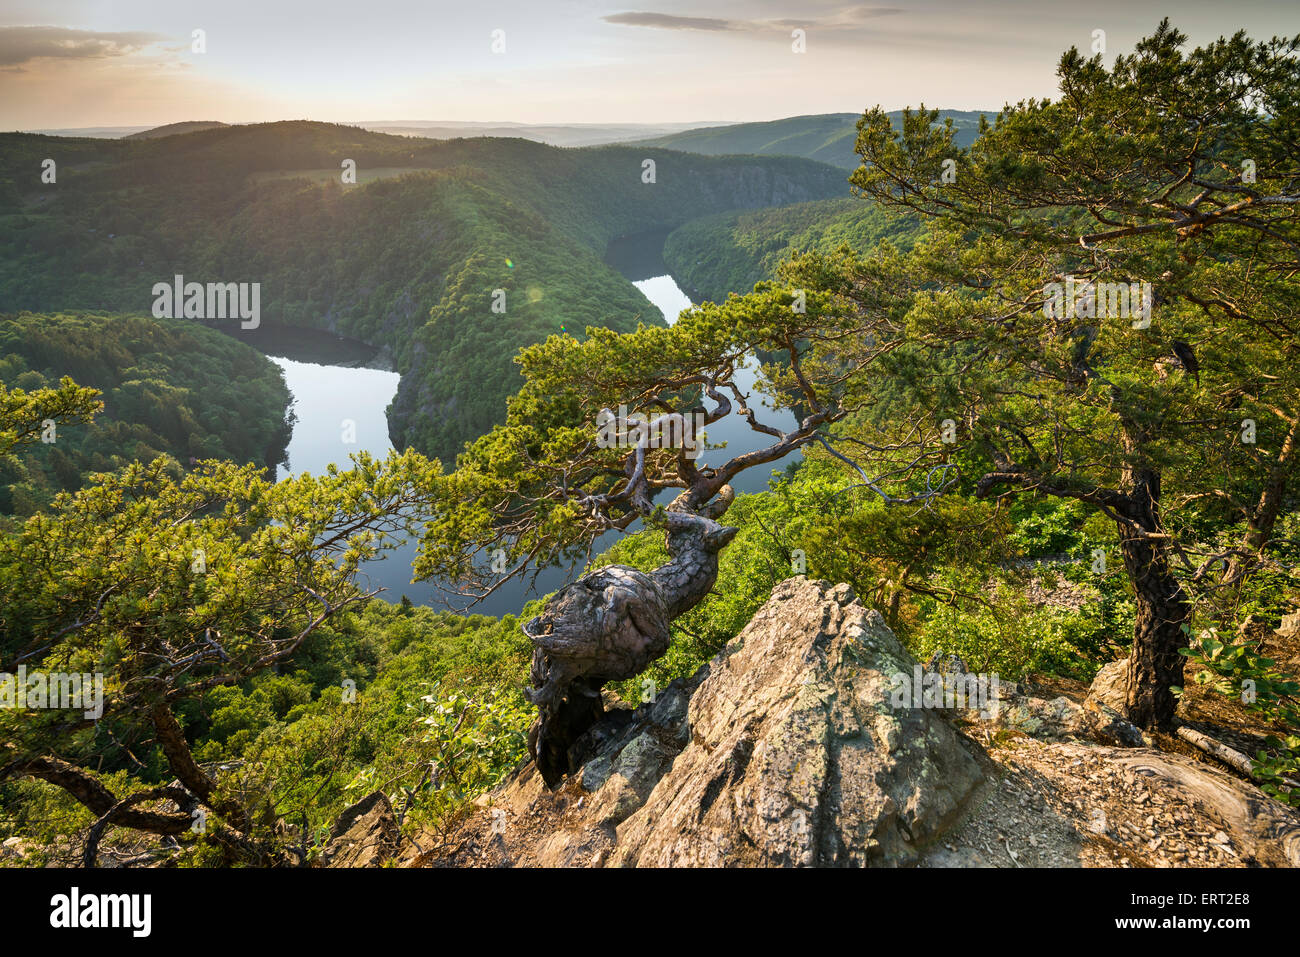 The river Vltava from the lookout Maj, Czech Republic Stock Photo